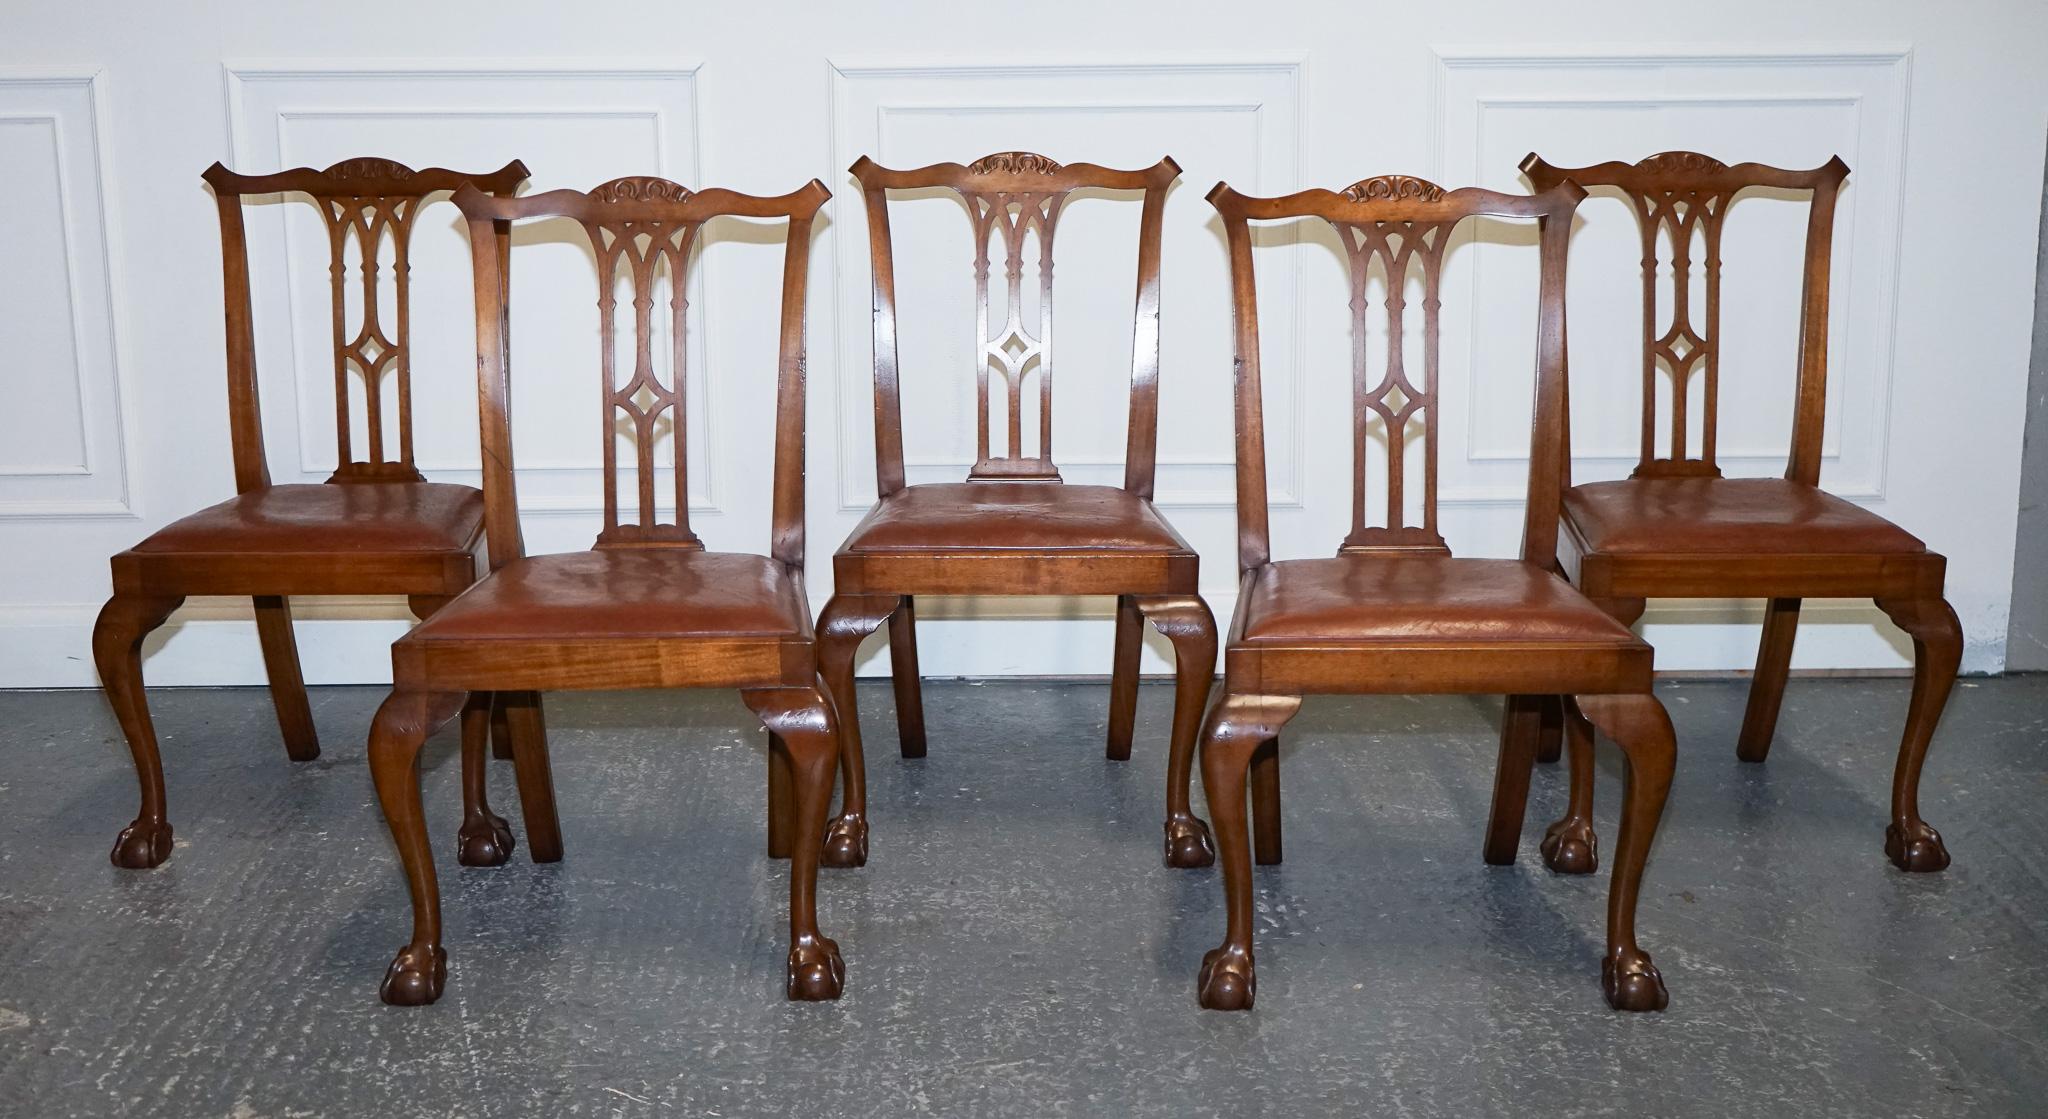 
We are delighted to offer for sale this Lovely Chippendale Style Set of 5 Dining Chairs. 

A set of Chippendale style dining chairs with leather seats is a perfect choice for a round table, offering both comfort and elegance. These chairs feature